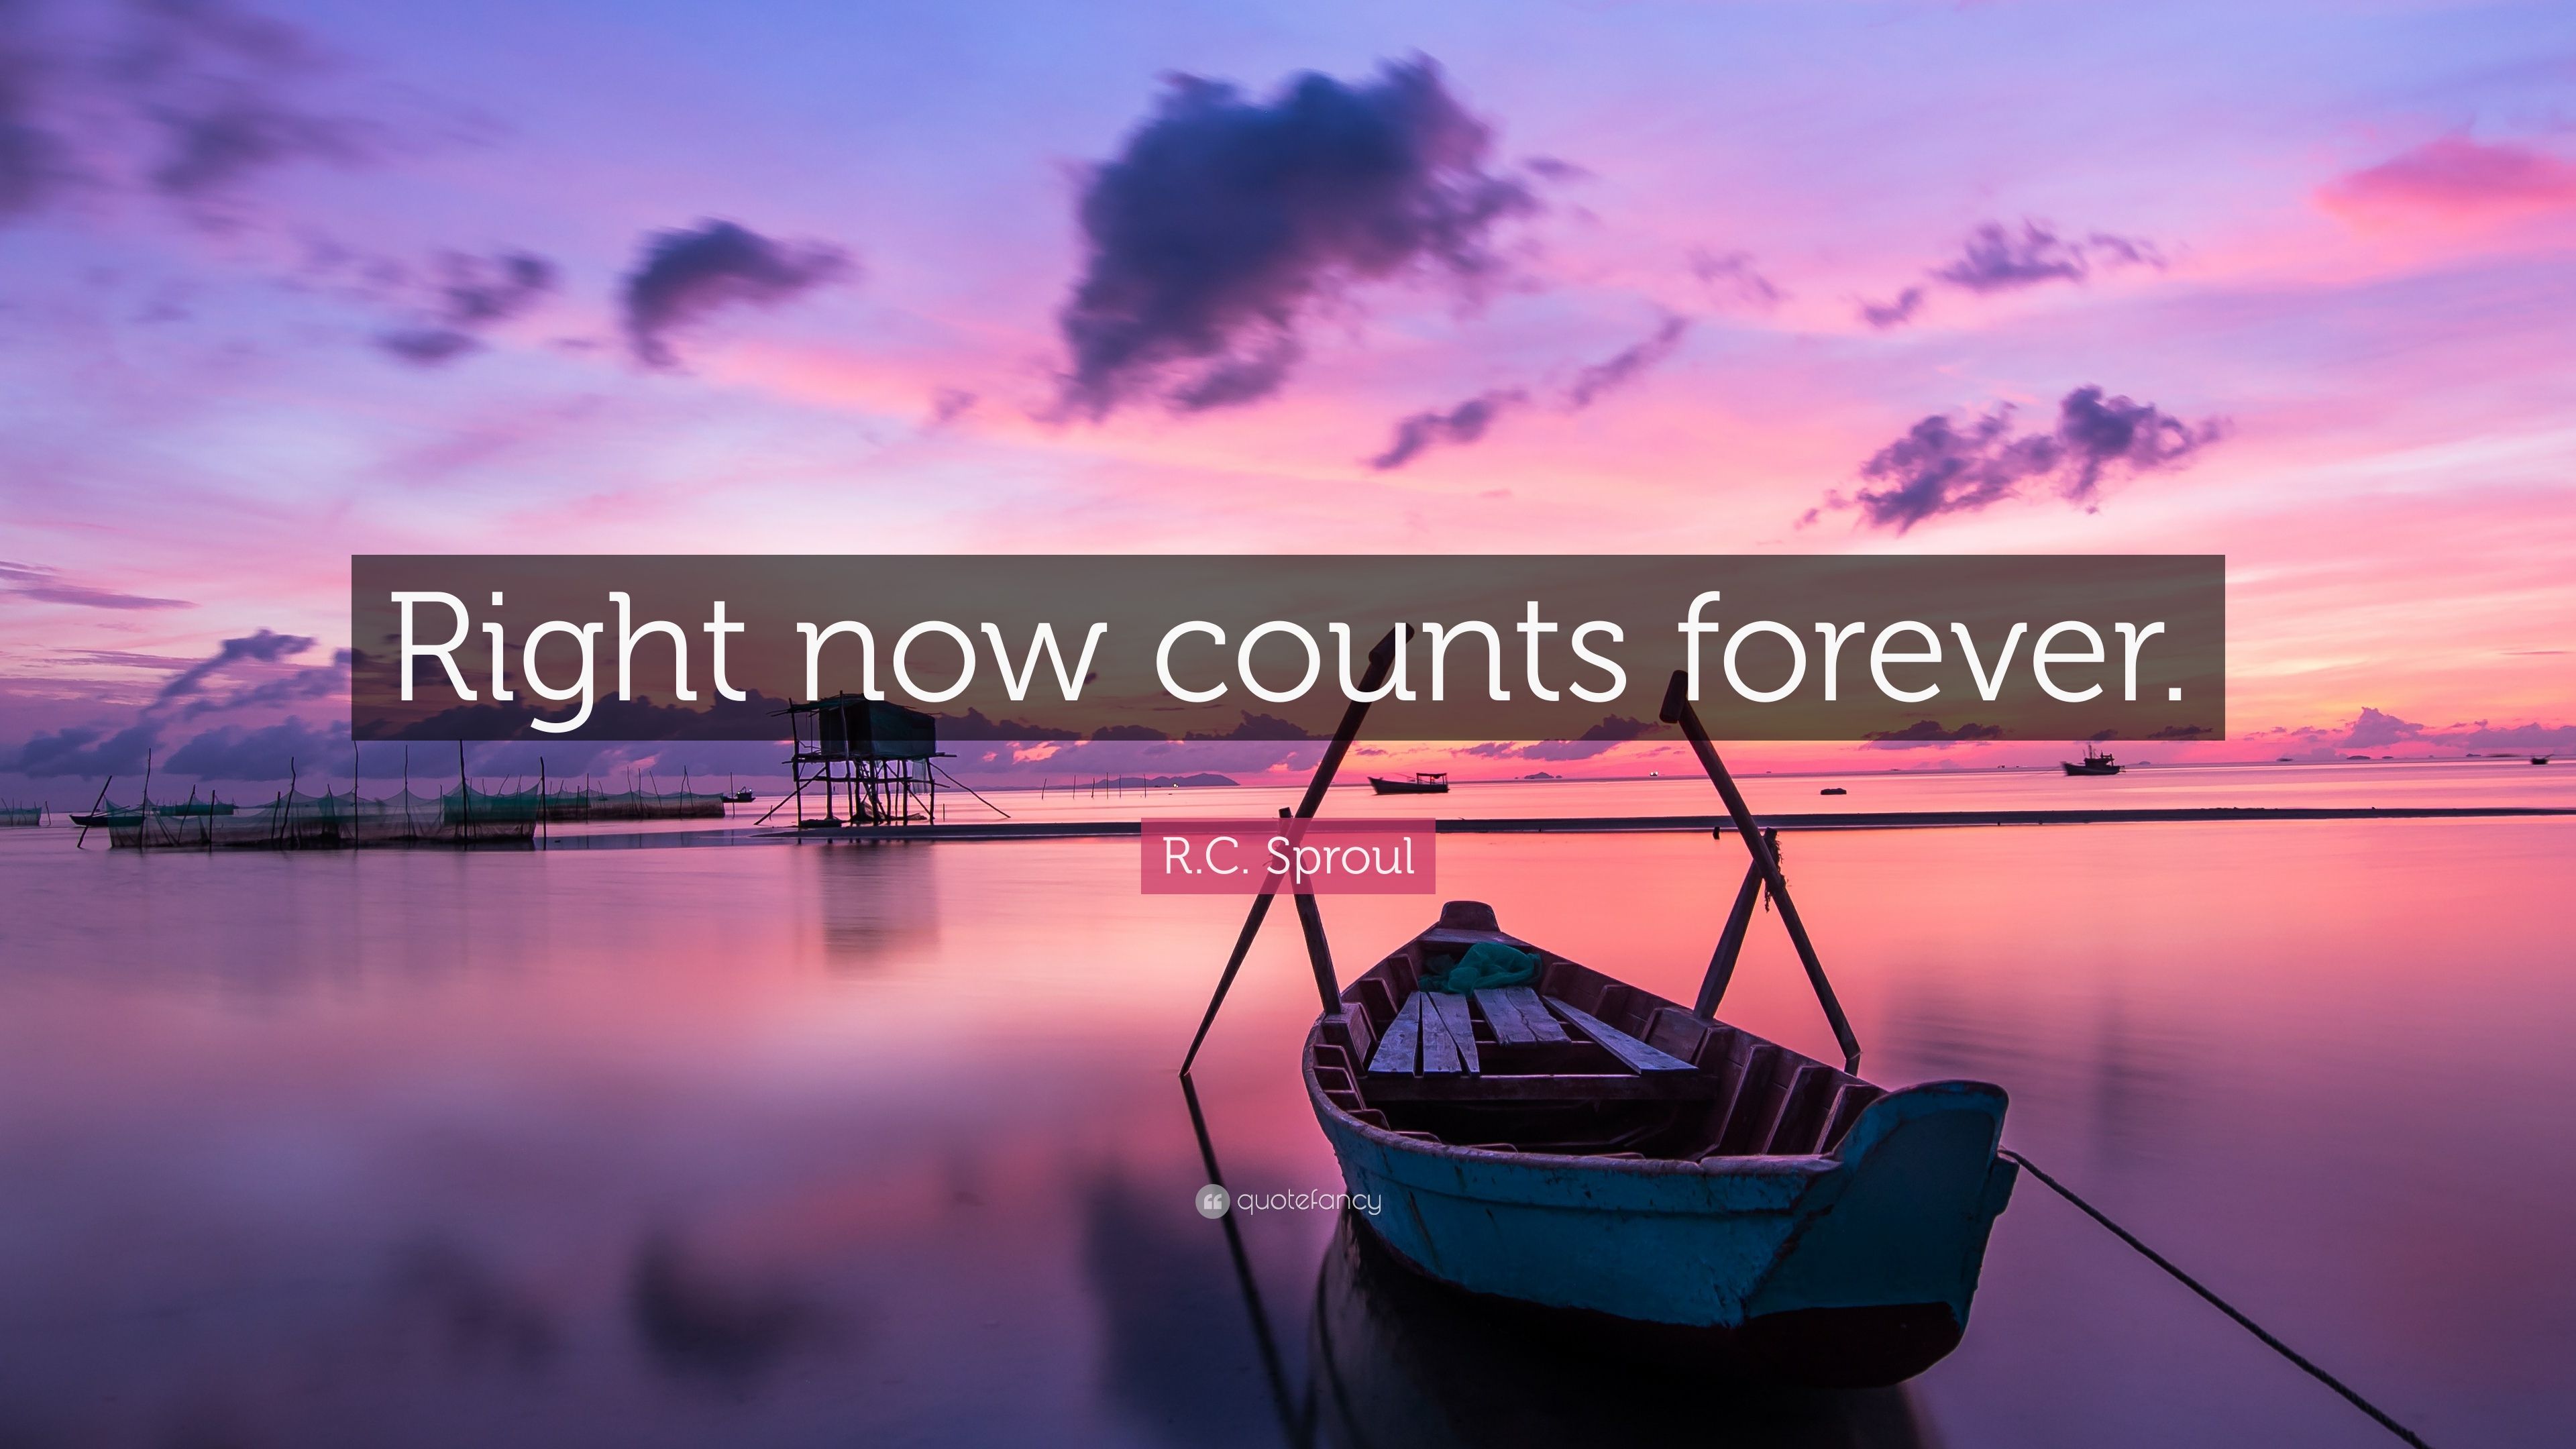 R.C. Sproul Quote: “Right now counts forever.” 12 wallpaper